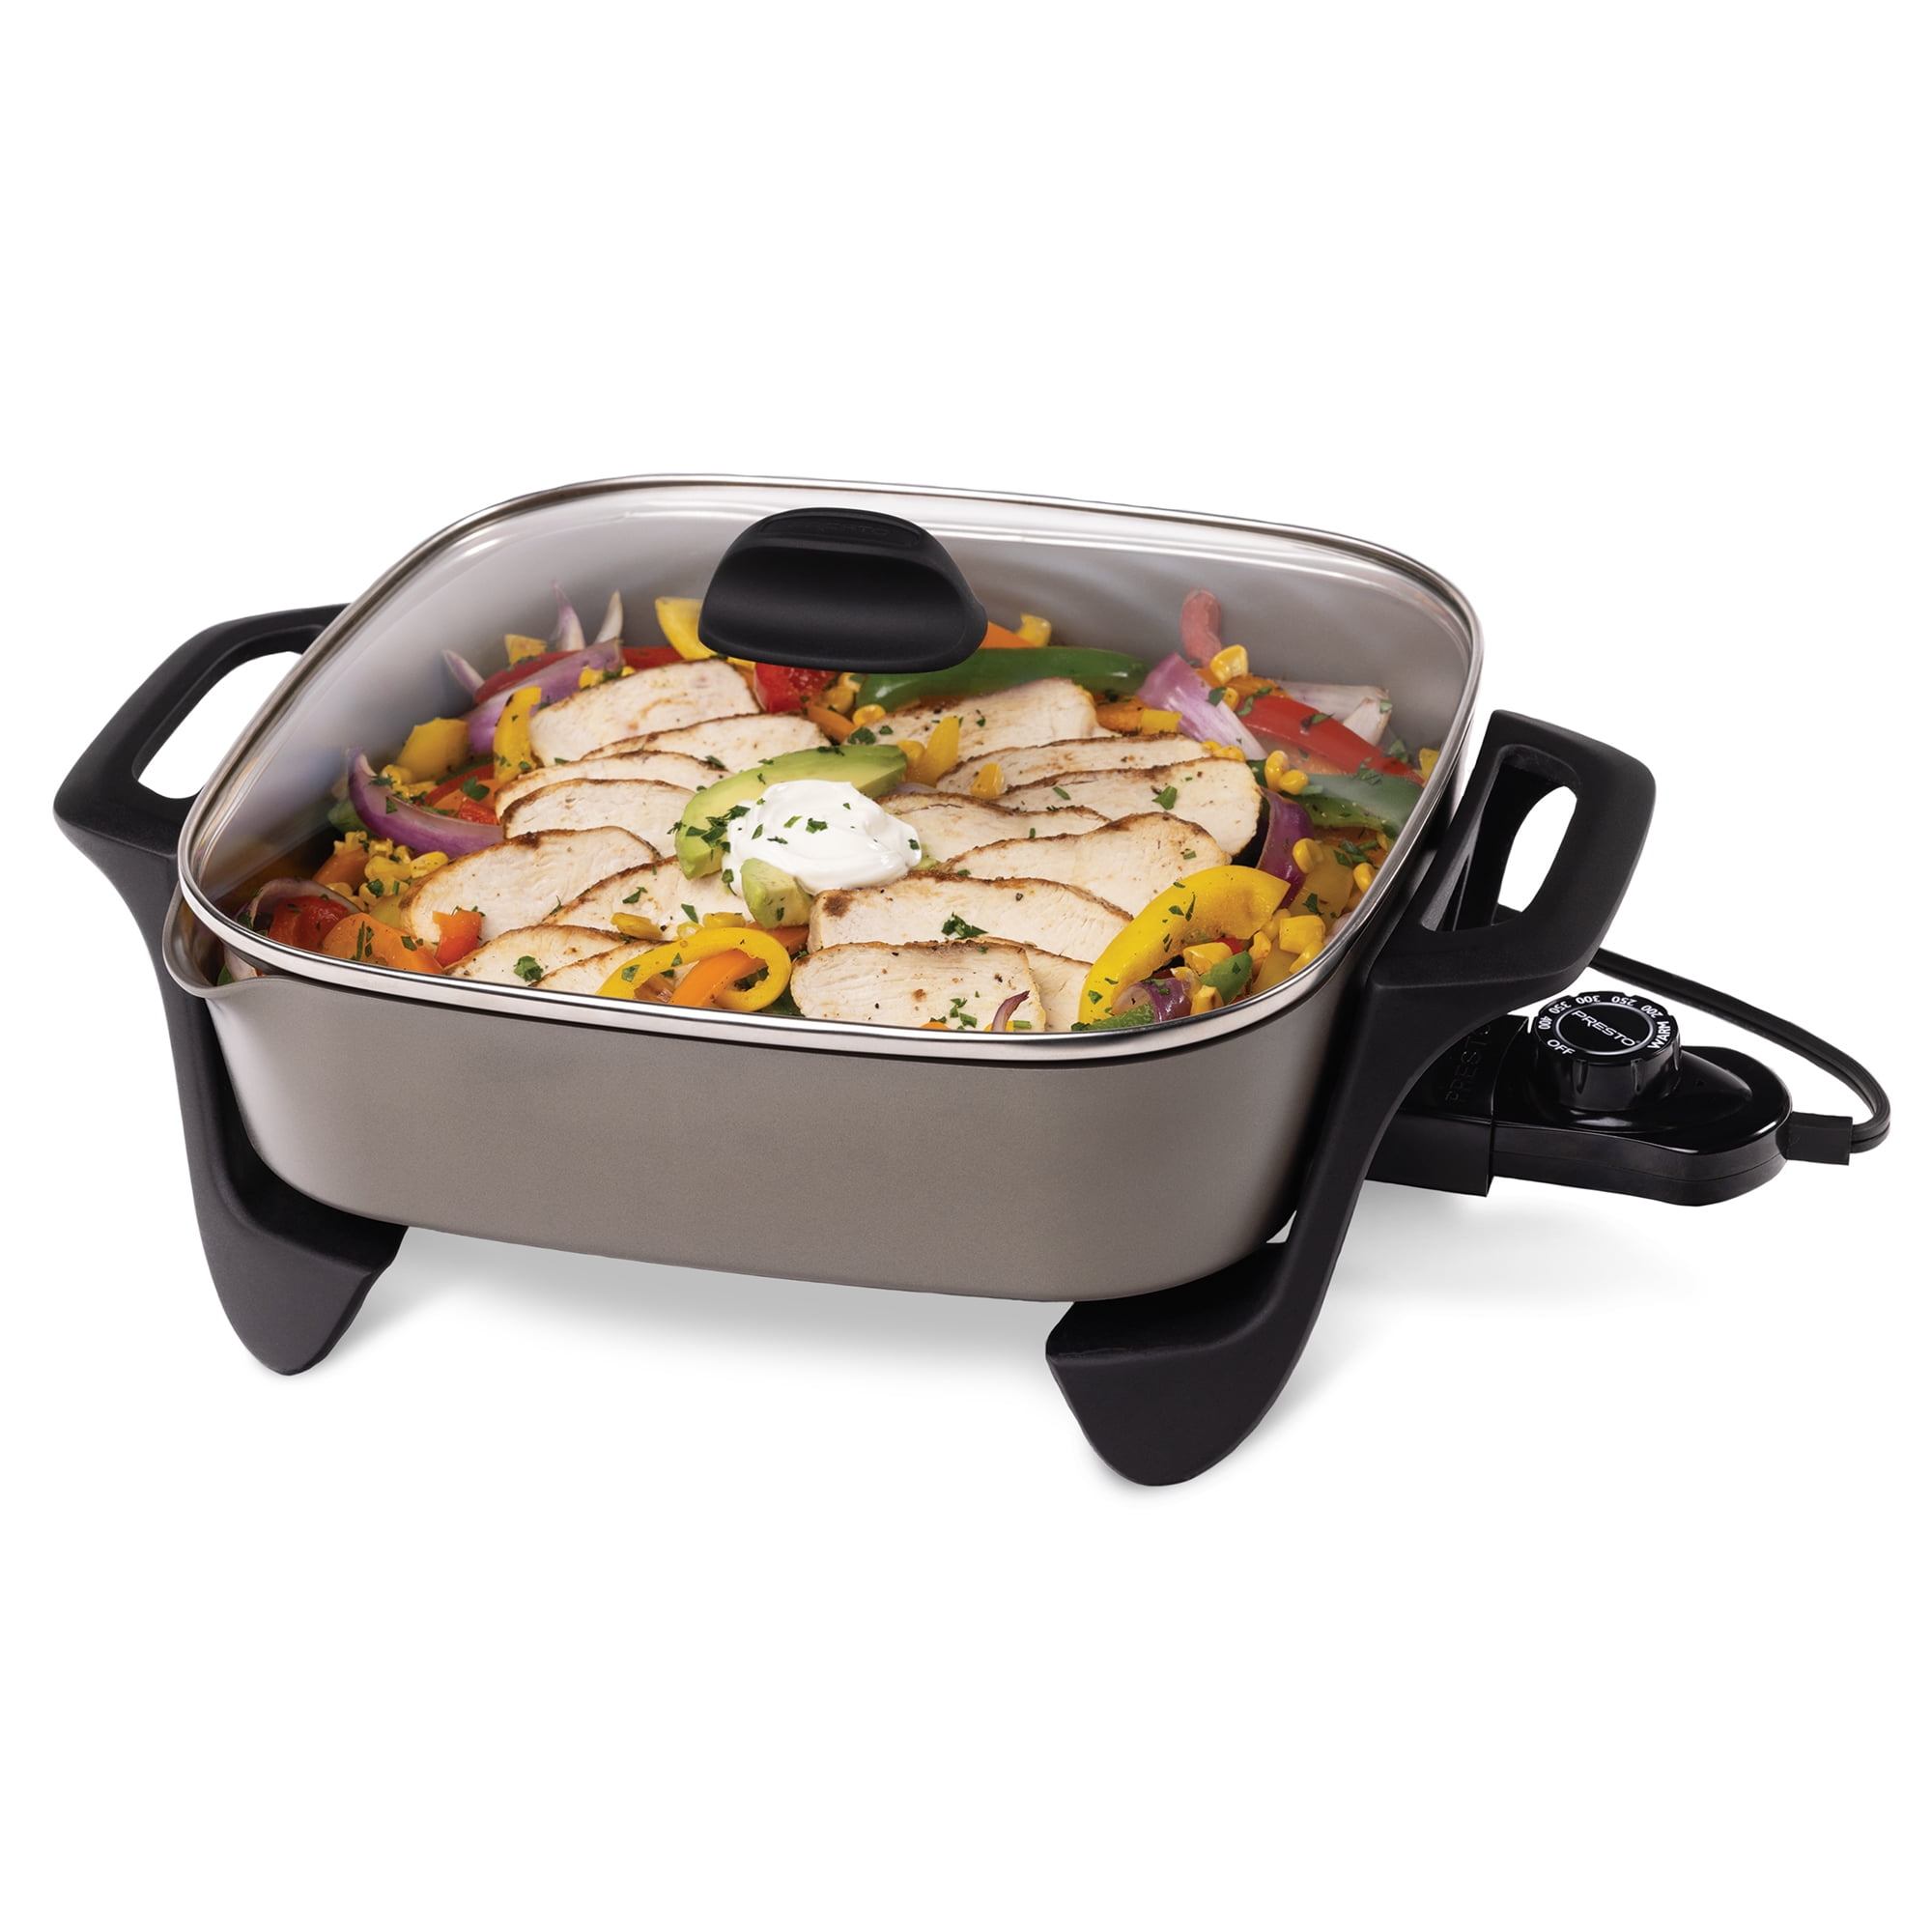 Brentwood Appliances 16 sq. in. Black Nonstick Electric Skillet with Glass  Lid SK-46 - The Home Depot